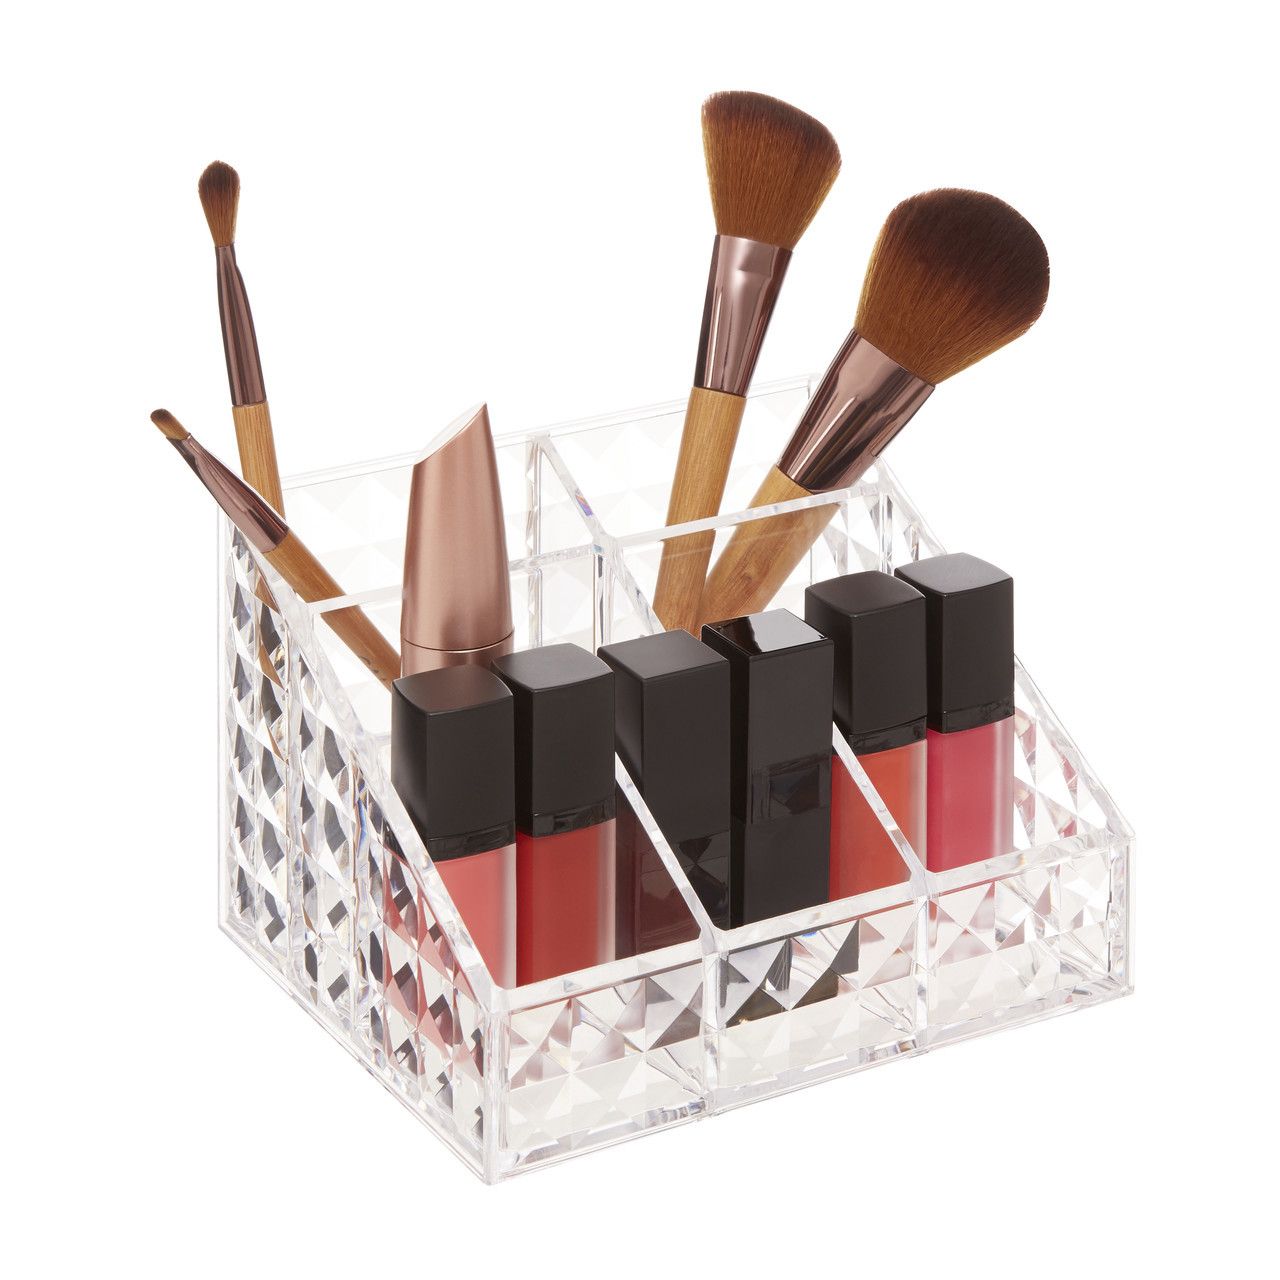 Homewares Cosmetic Organiser With 7 Compartments